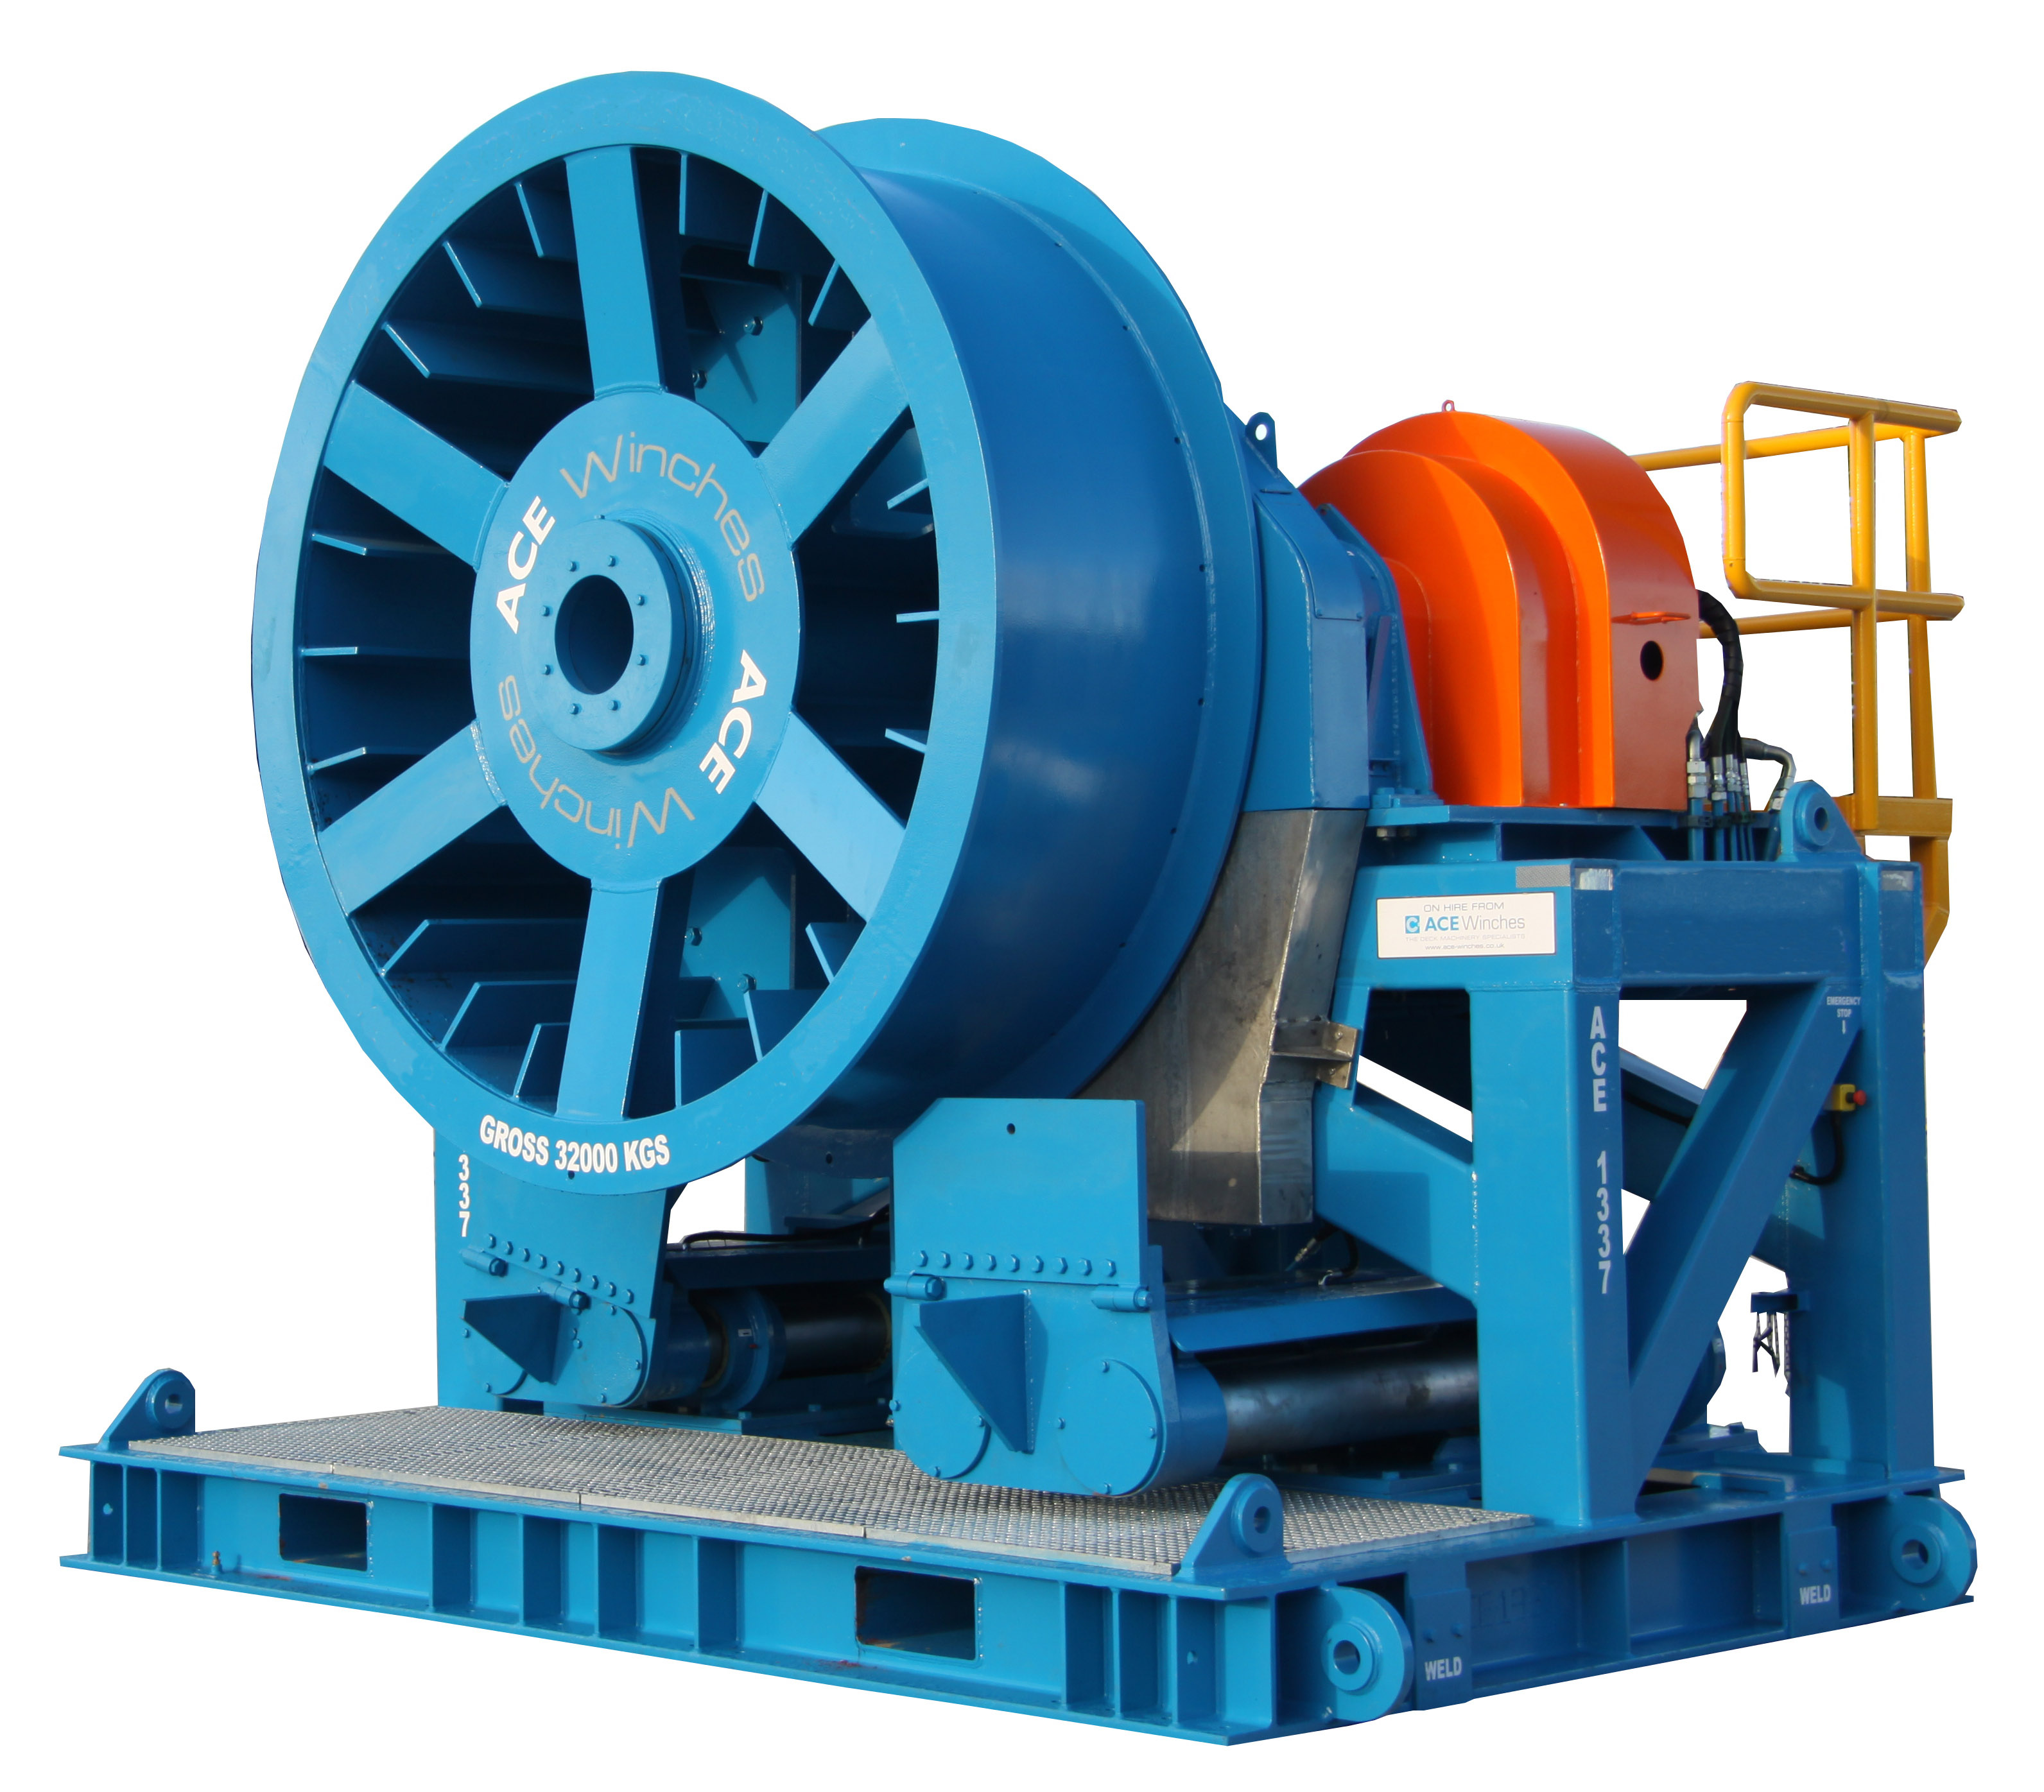 ACE 60 Tonne SWL Hydraulic Traction Capstan Spooling Winch